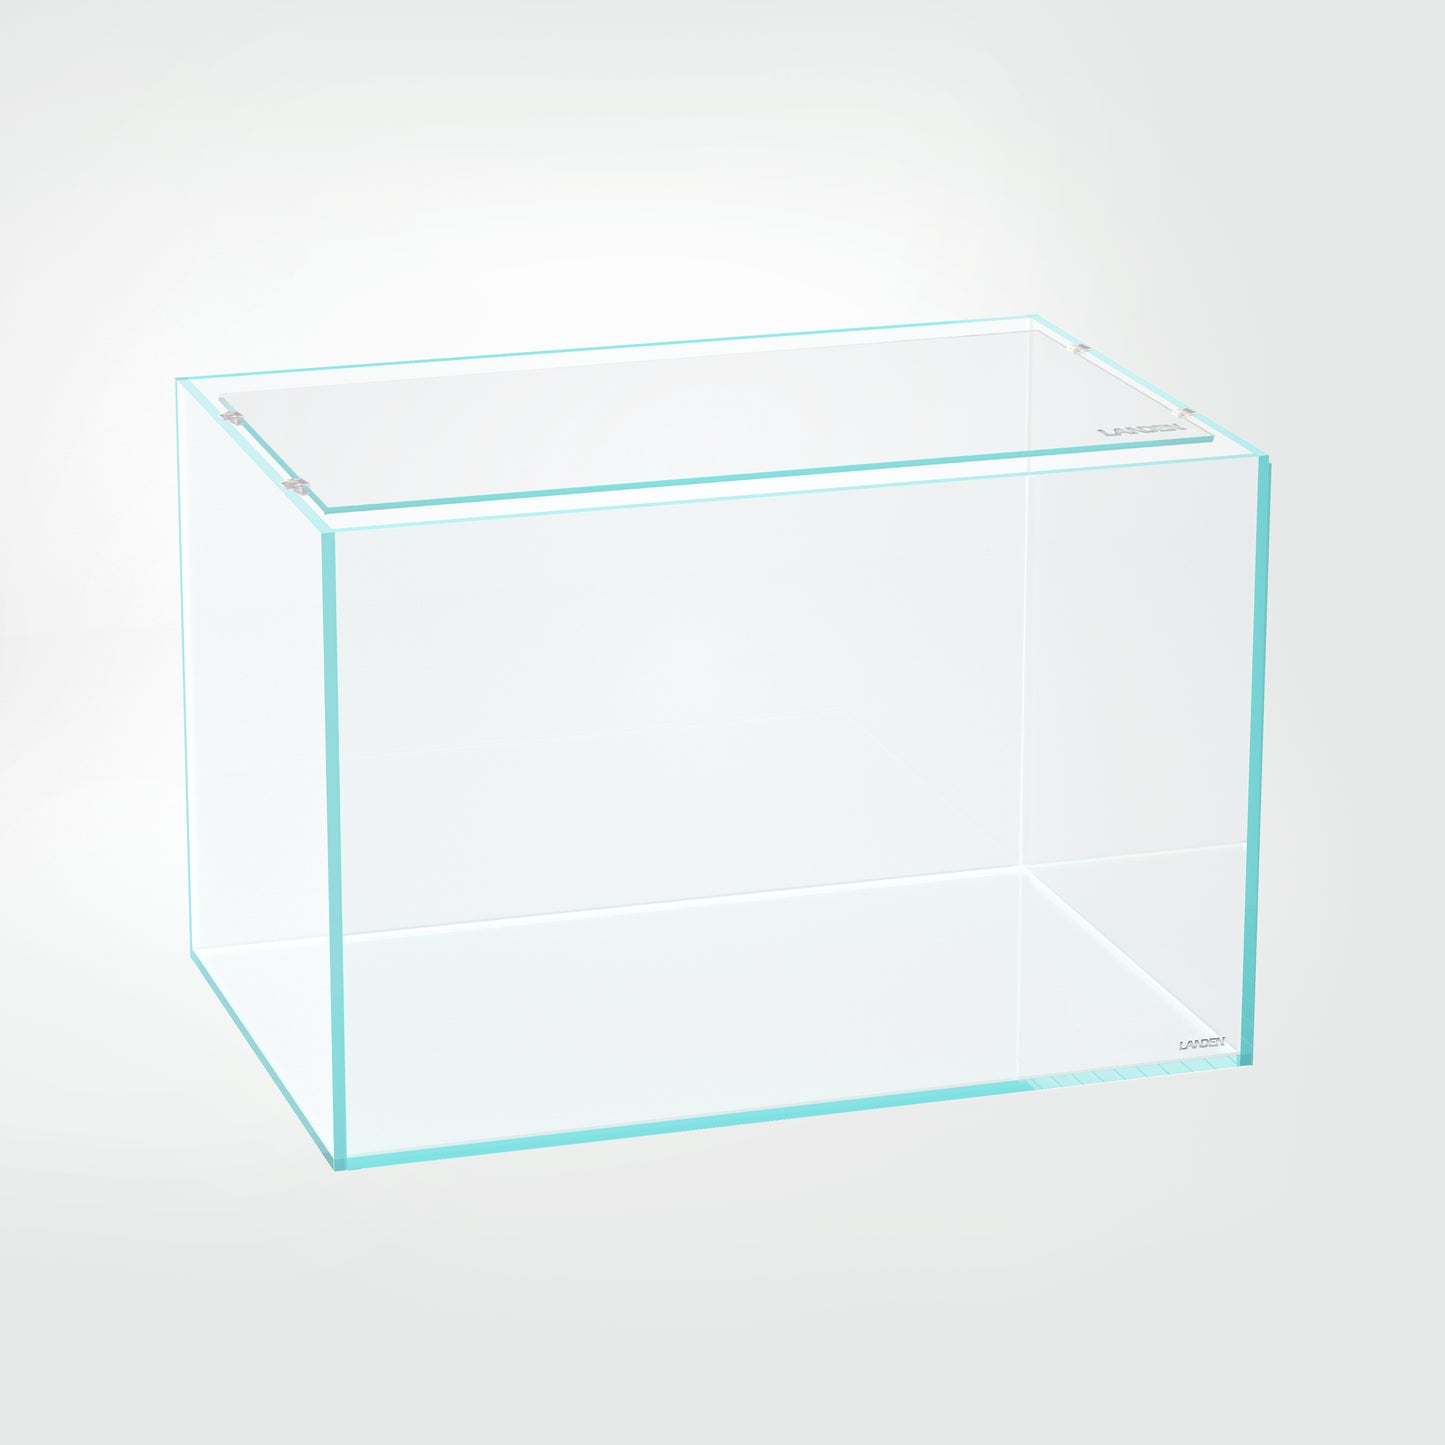 LANDEN 4mm Thick Clear Glass Aquarium Lid,Includes 4 Clips for Secure Placement, 576 x 310mm(22.68x12.2 inches) Adapted to SD604040